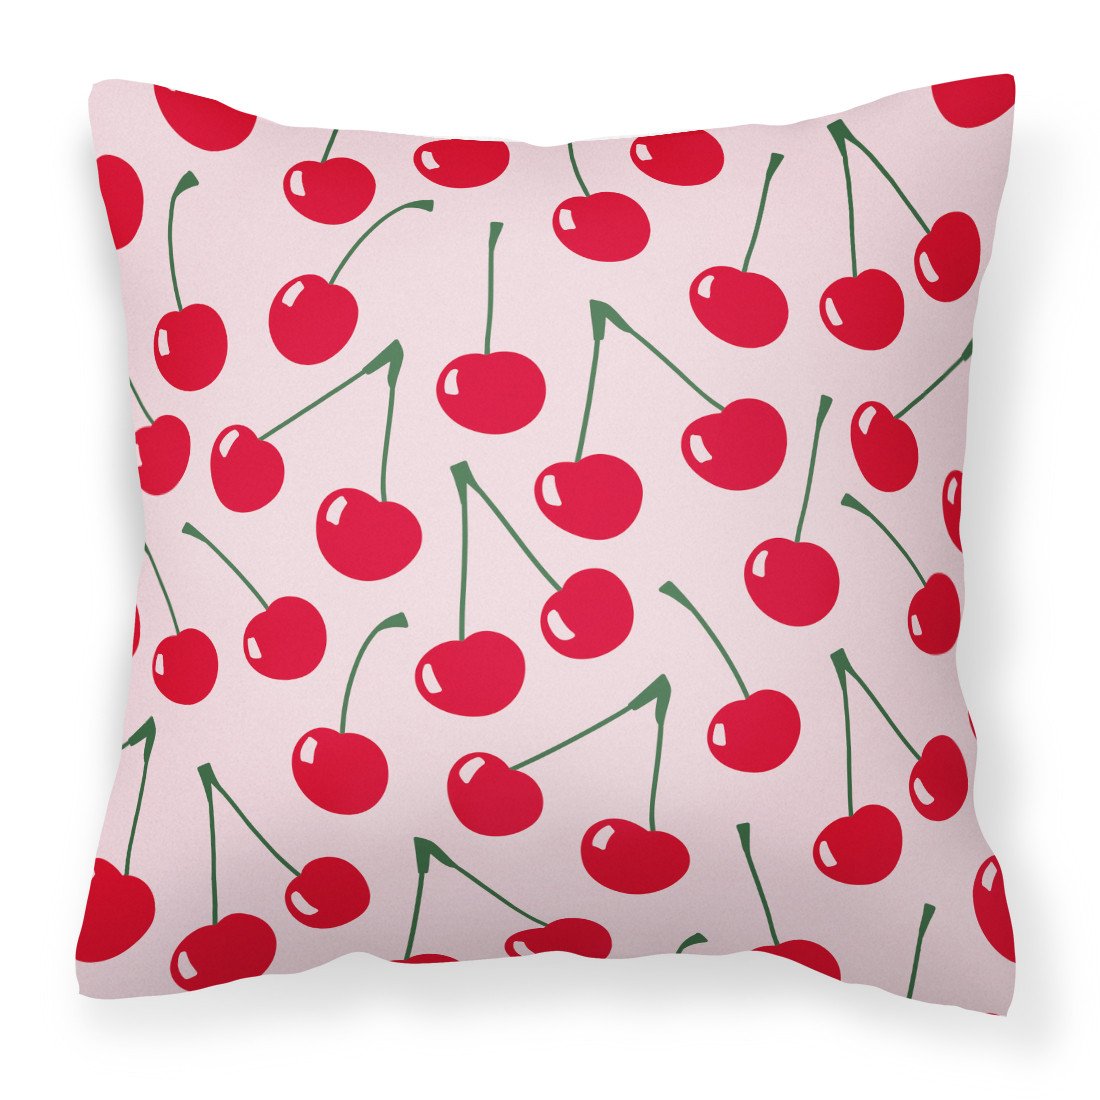 Cherries on Pink Fabric Decorative Pillow BB5139PW1818 by Caroline's Treasures